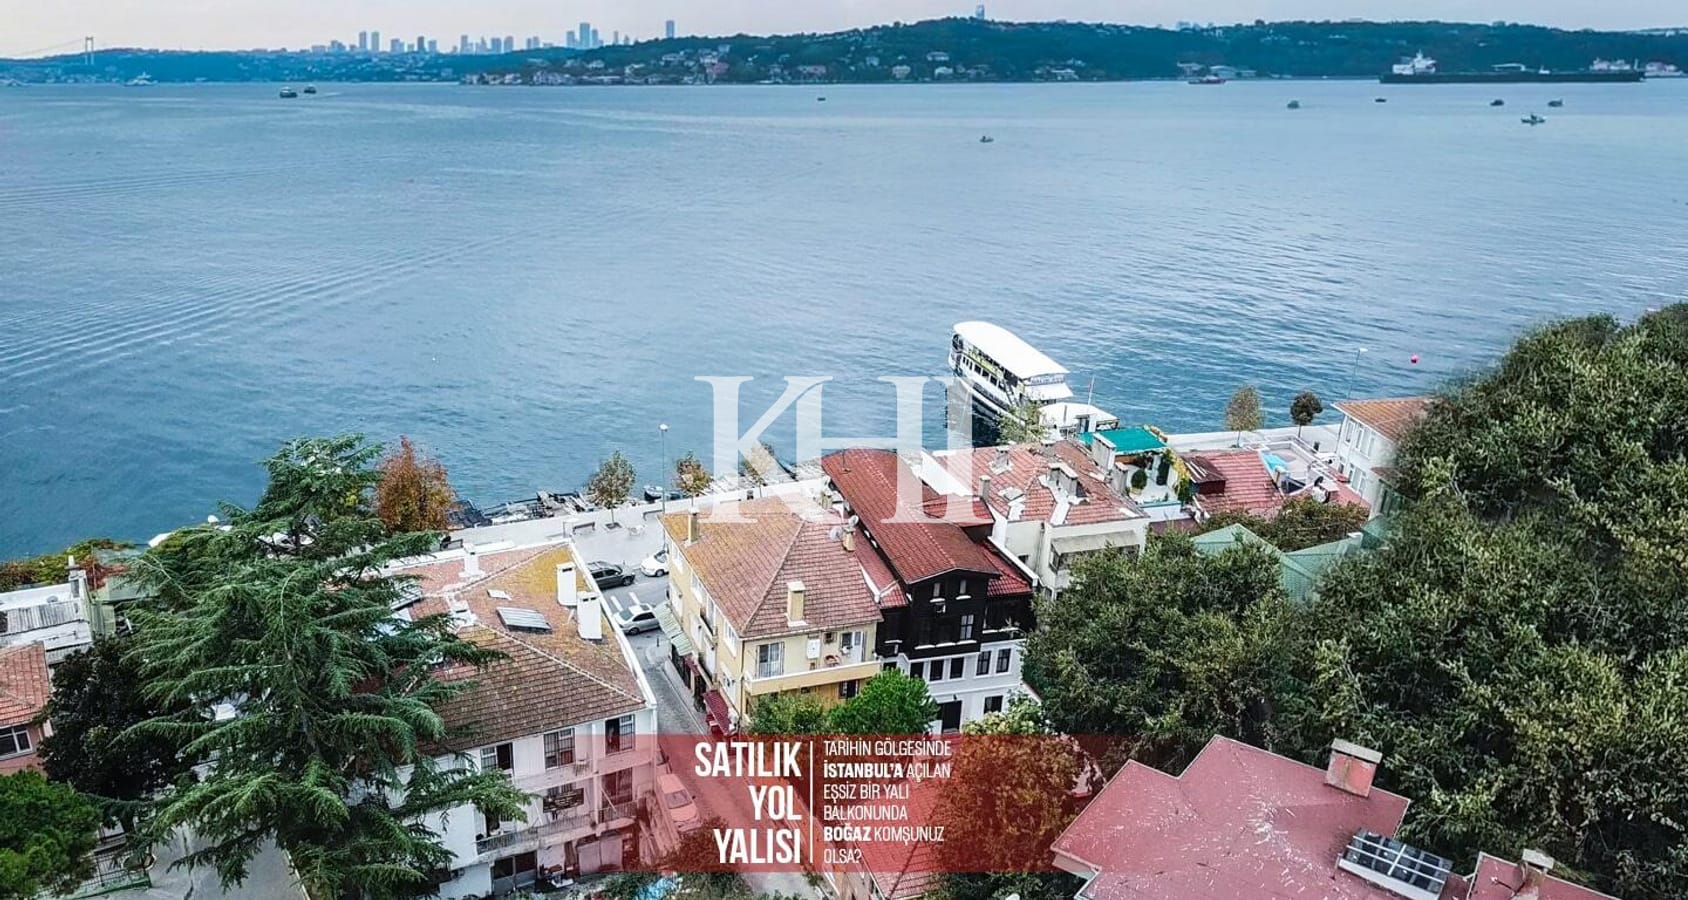 Historic Seafront Villa In Istanbul For Sale Slide Image 2